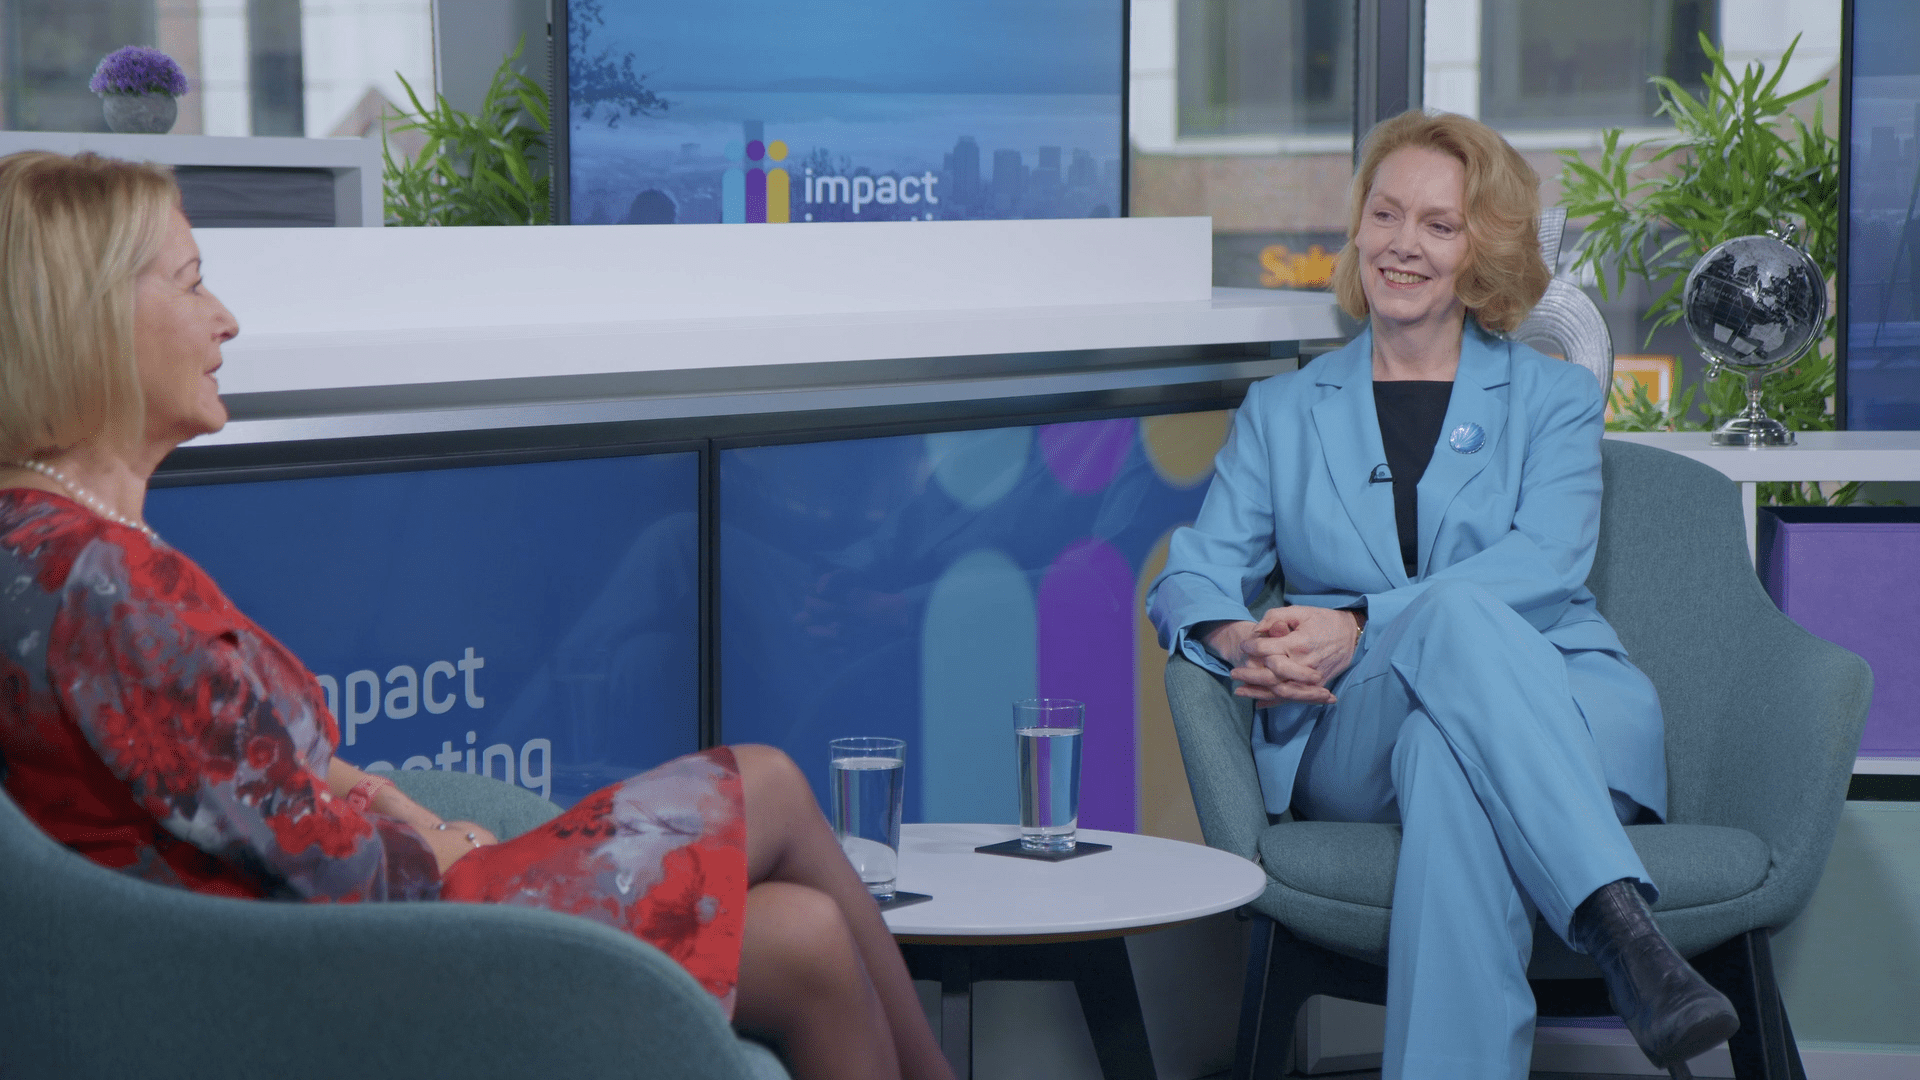 In Conversation with Dame Elizabeth Corley and Helen Dean, CEO of Nest